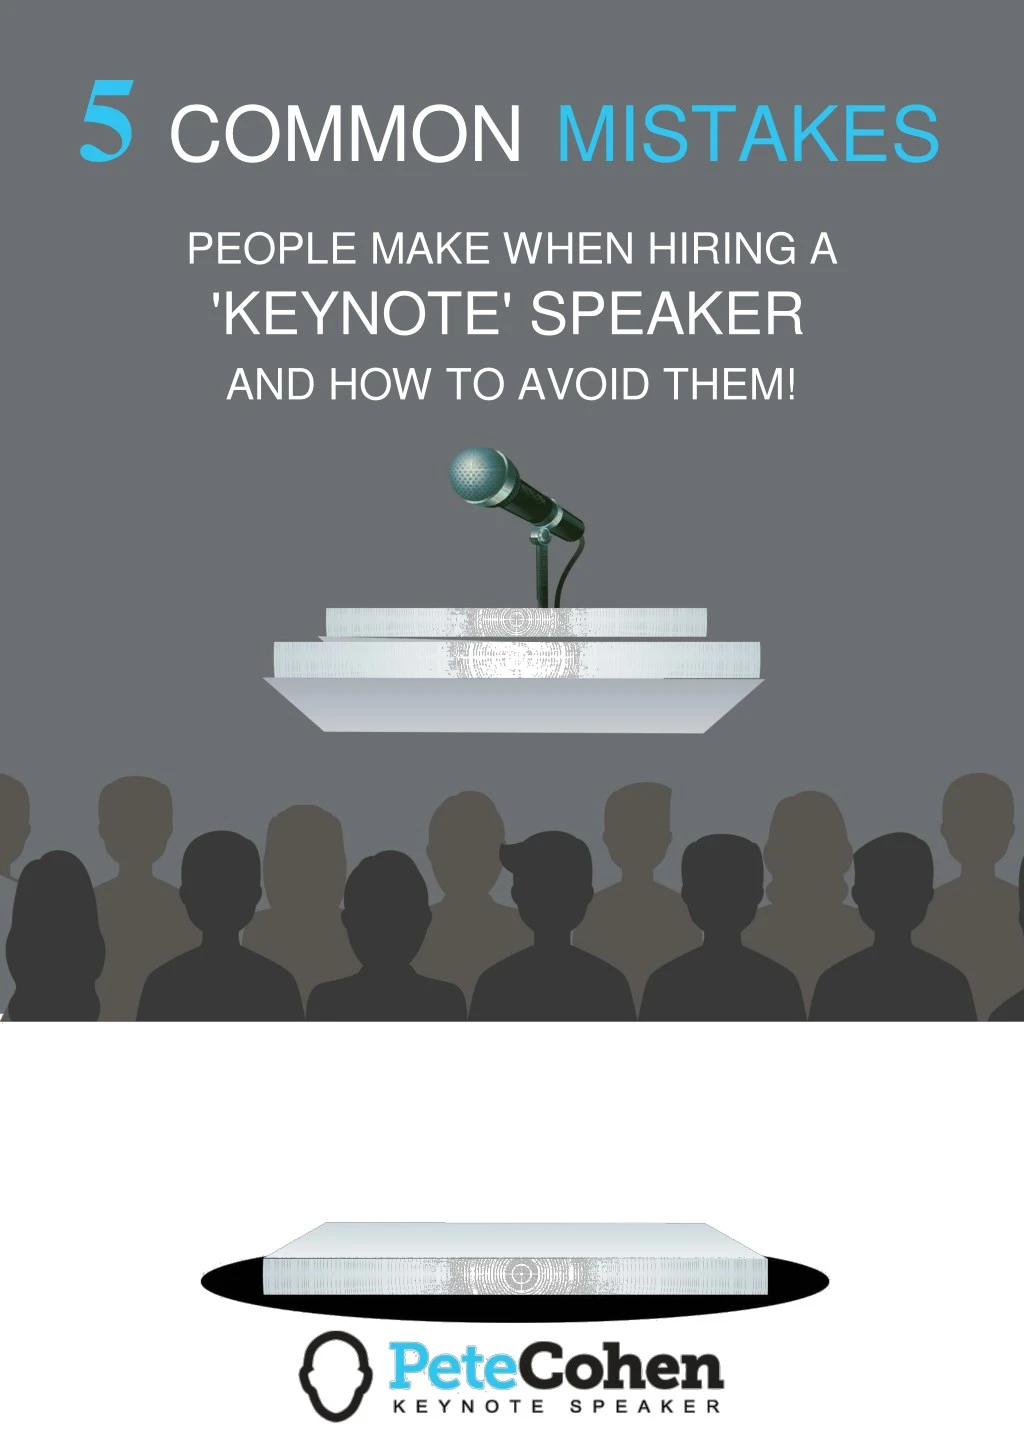 5 common mistakes people make when hiring